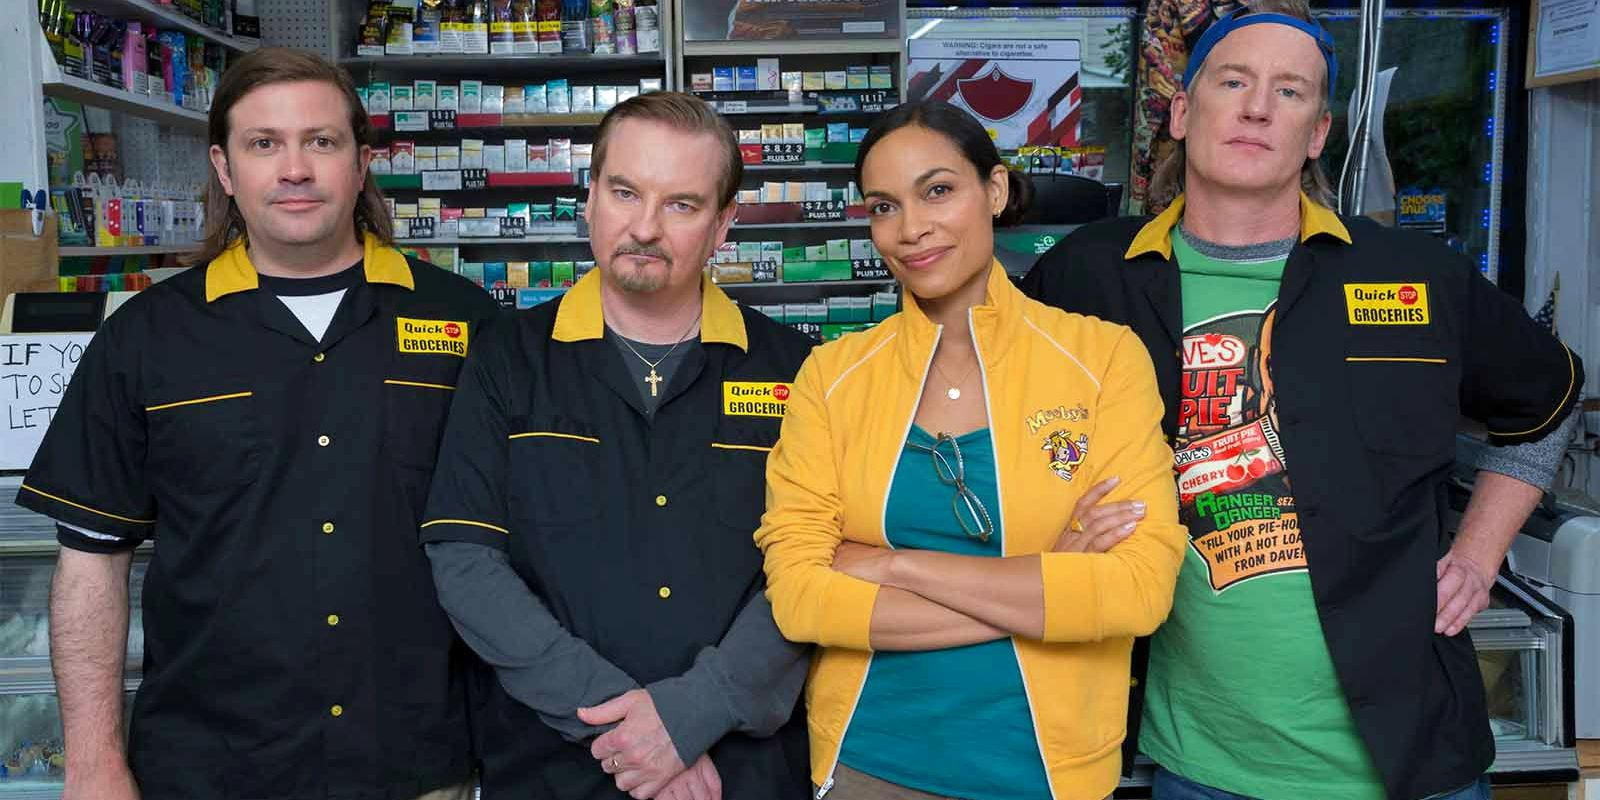 Clerks 3 Cast in store